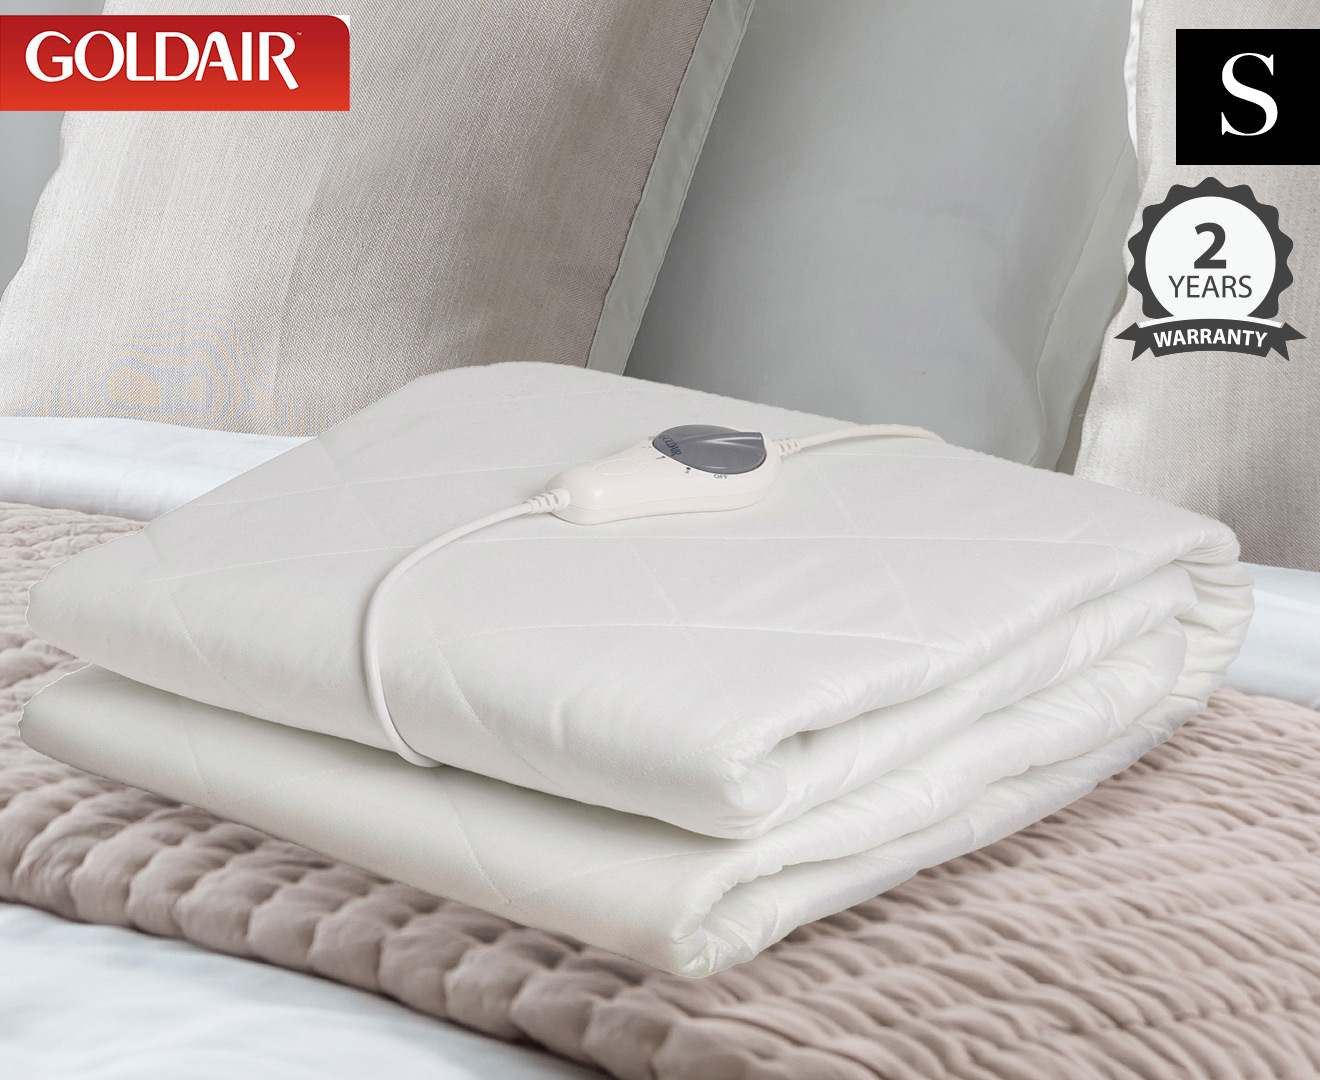 electric blanket and mattress protector